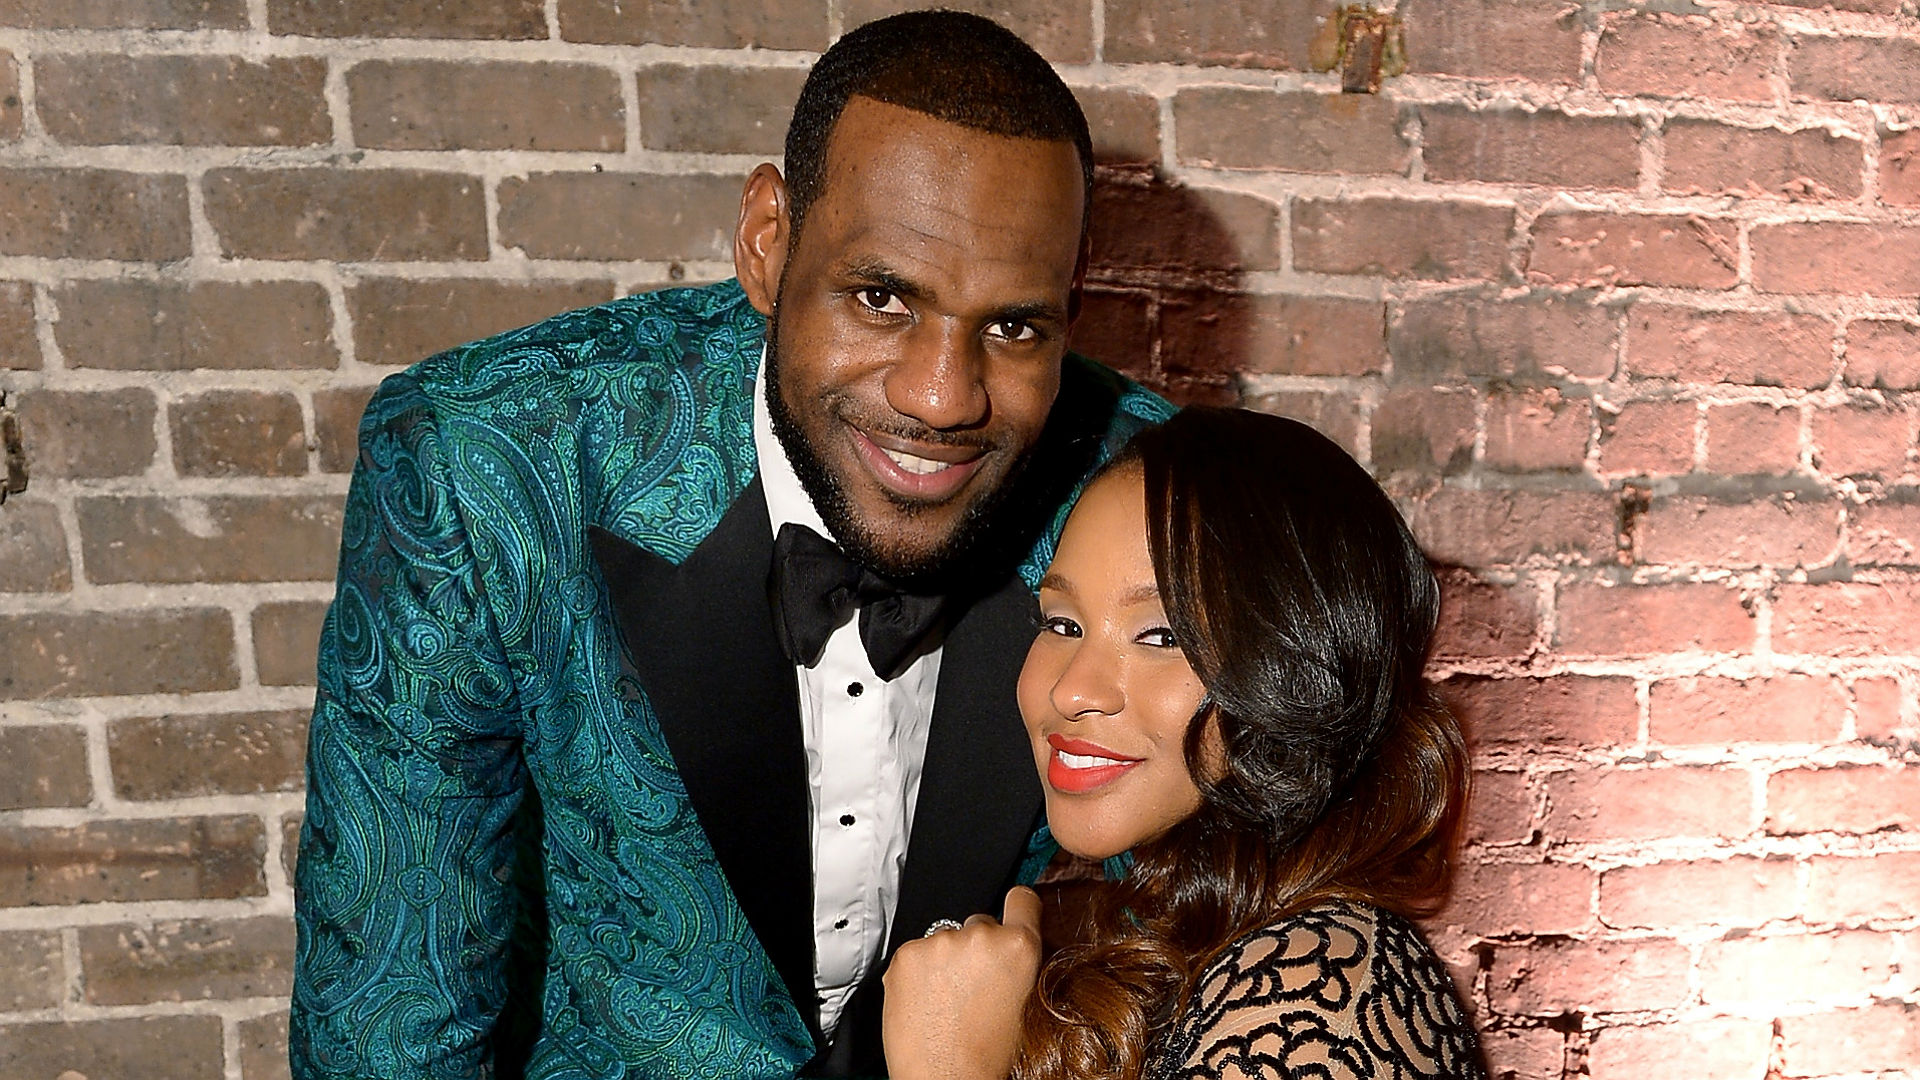 Lebron James Displays Affection Moment With His Wife Despite Cheating Rᴜmσrs Surfaced Online